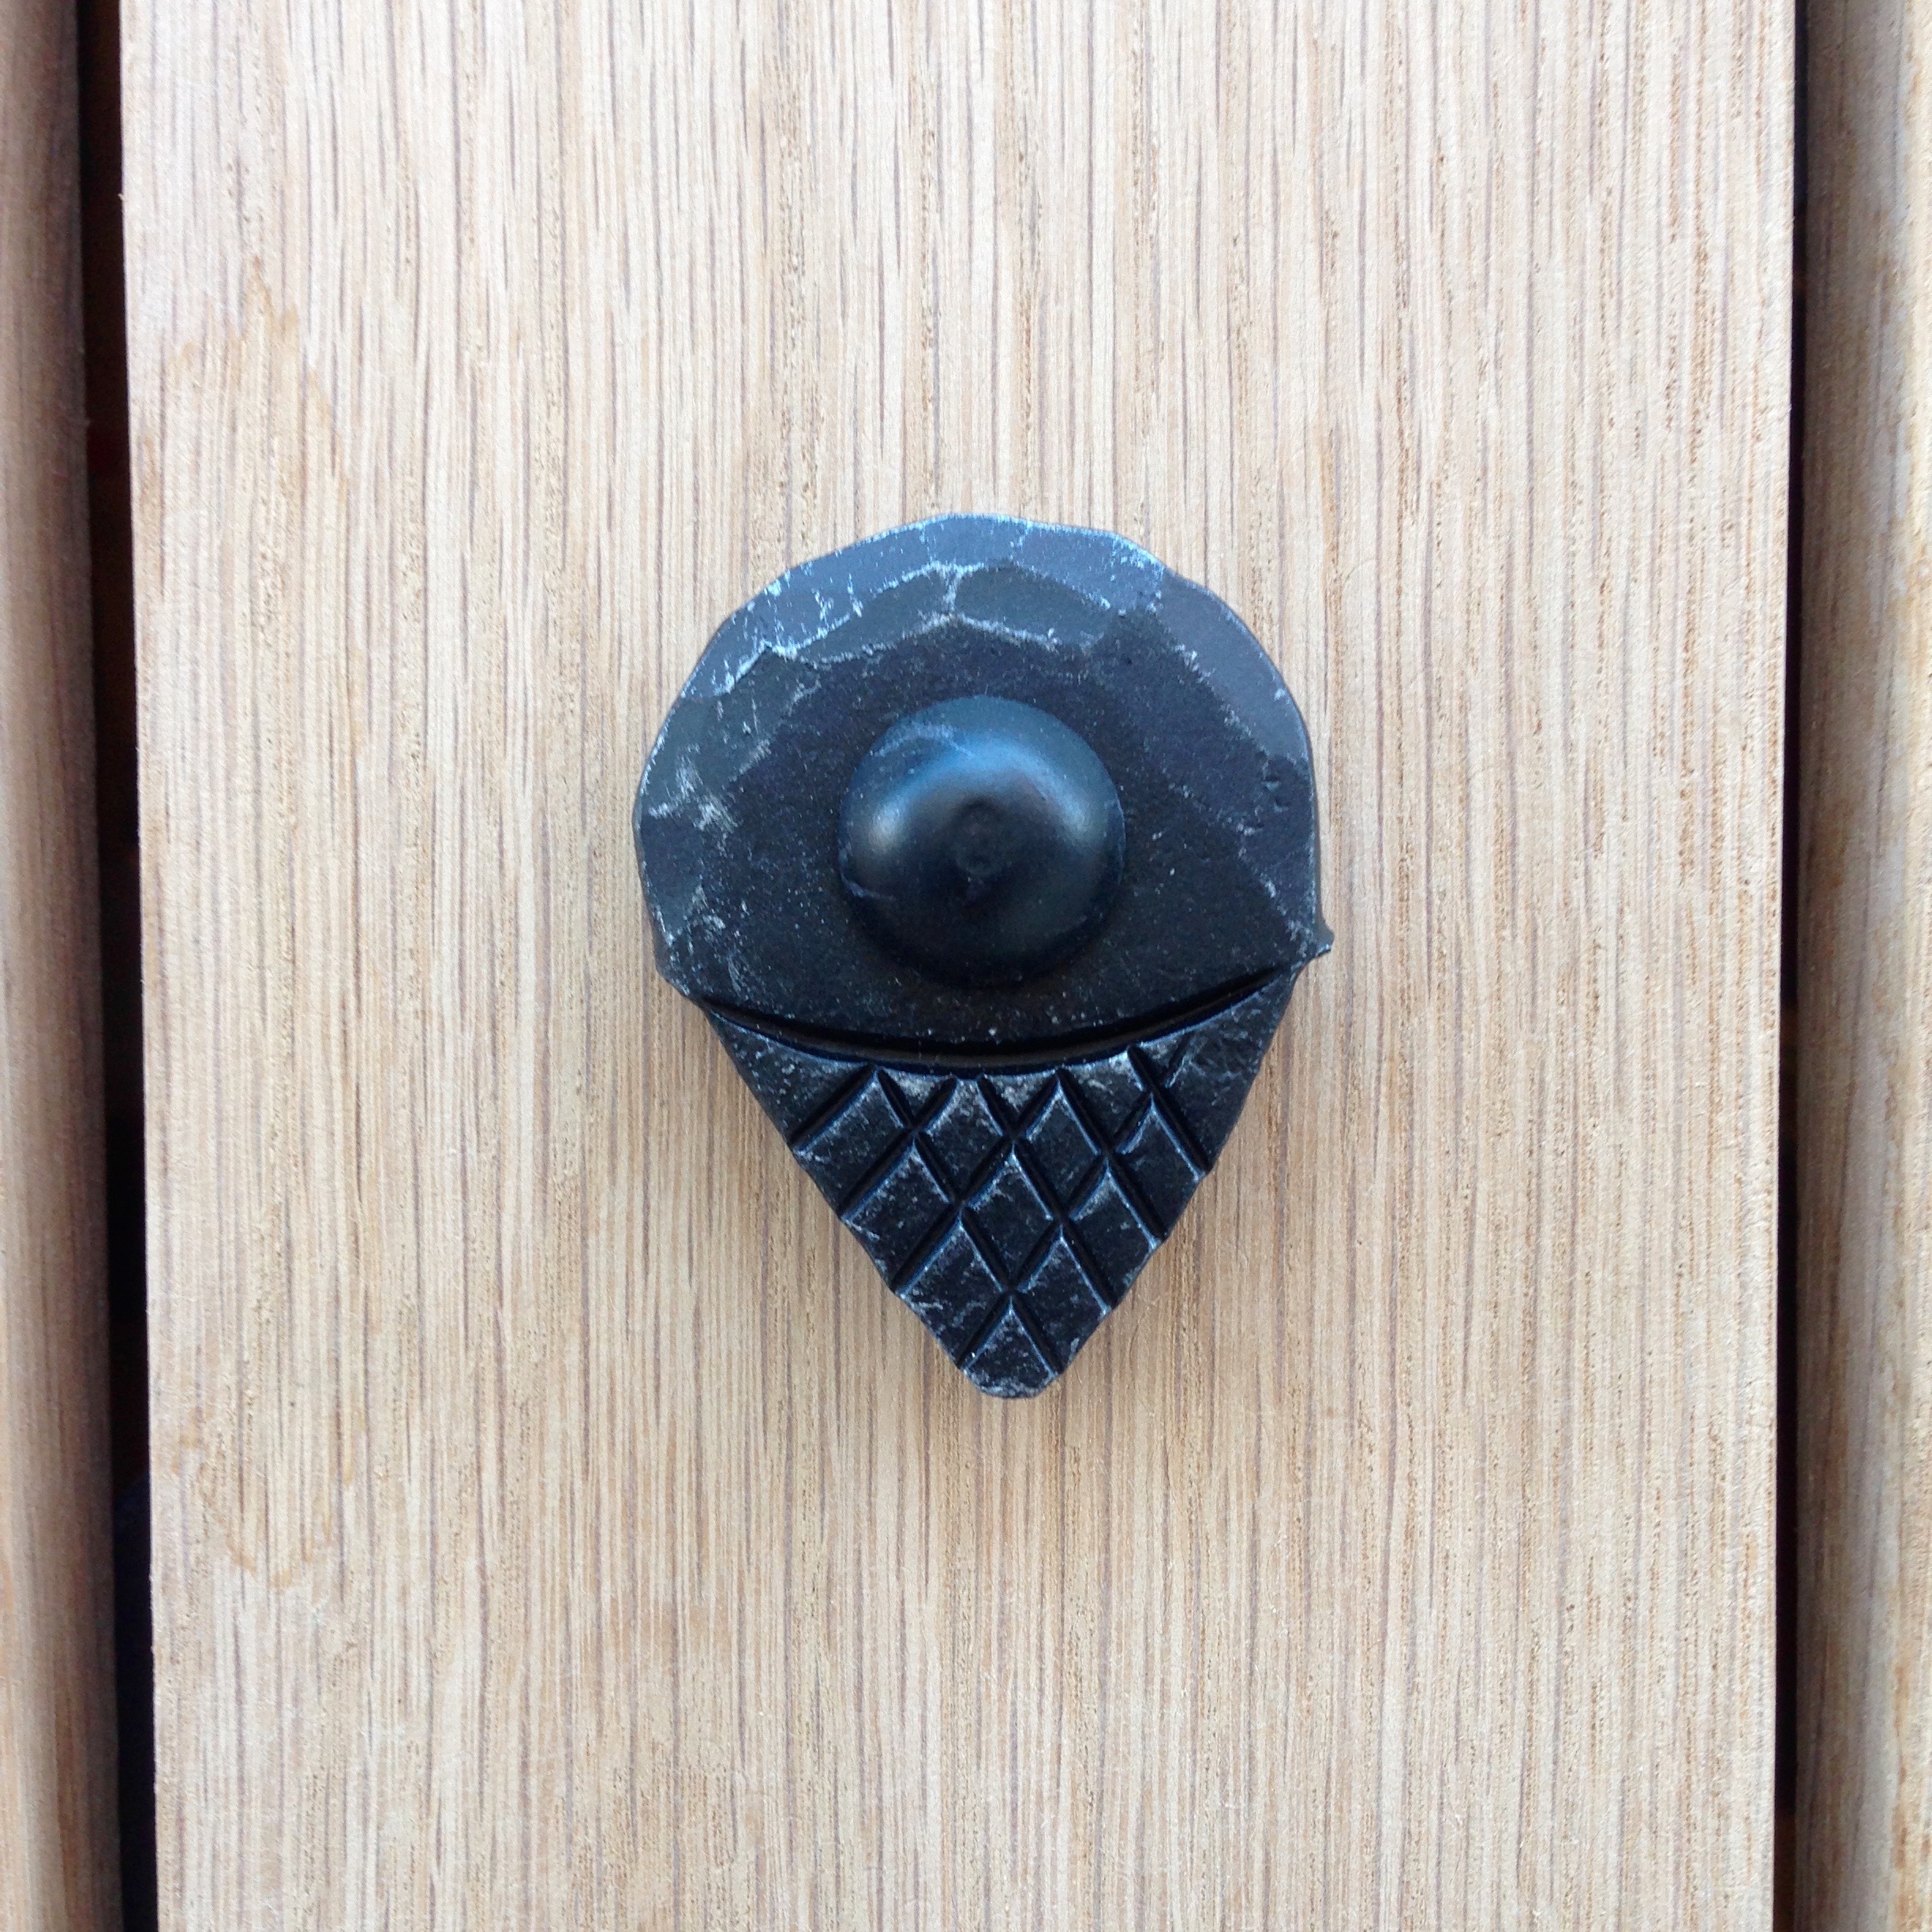 OAK PANEL GATE WITH FORGED RIVETS (detail of ice cream rivet)